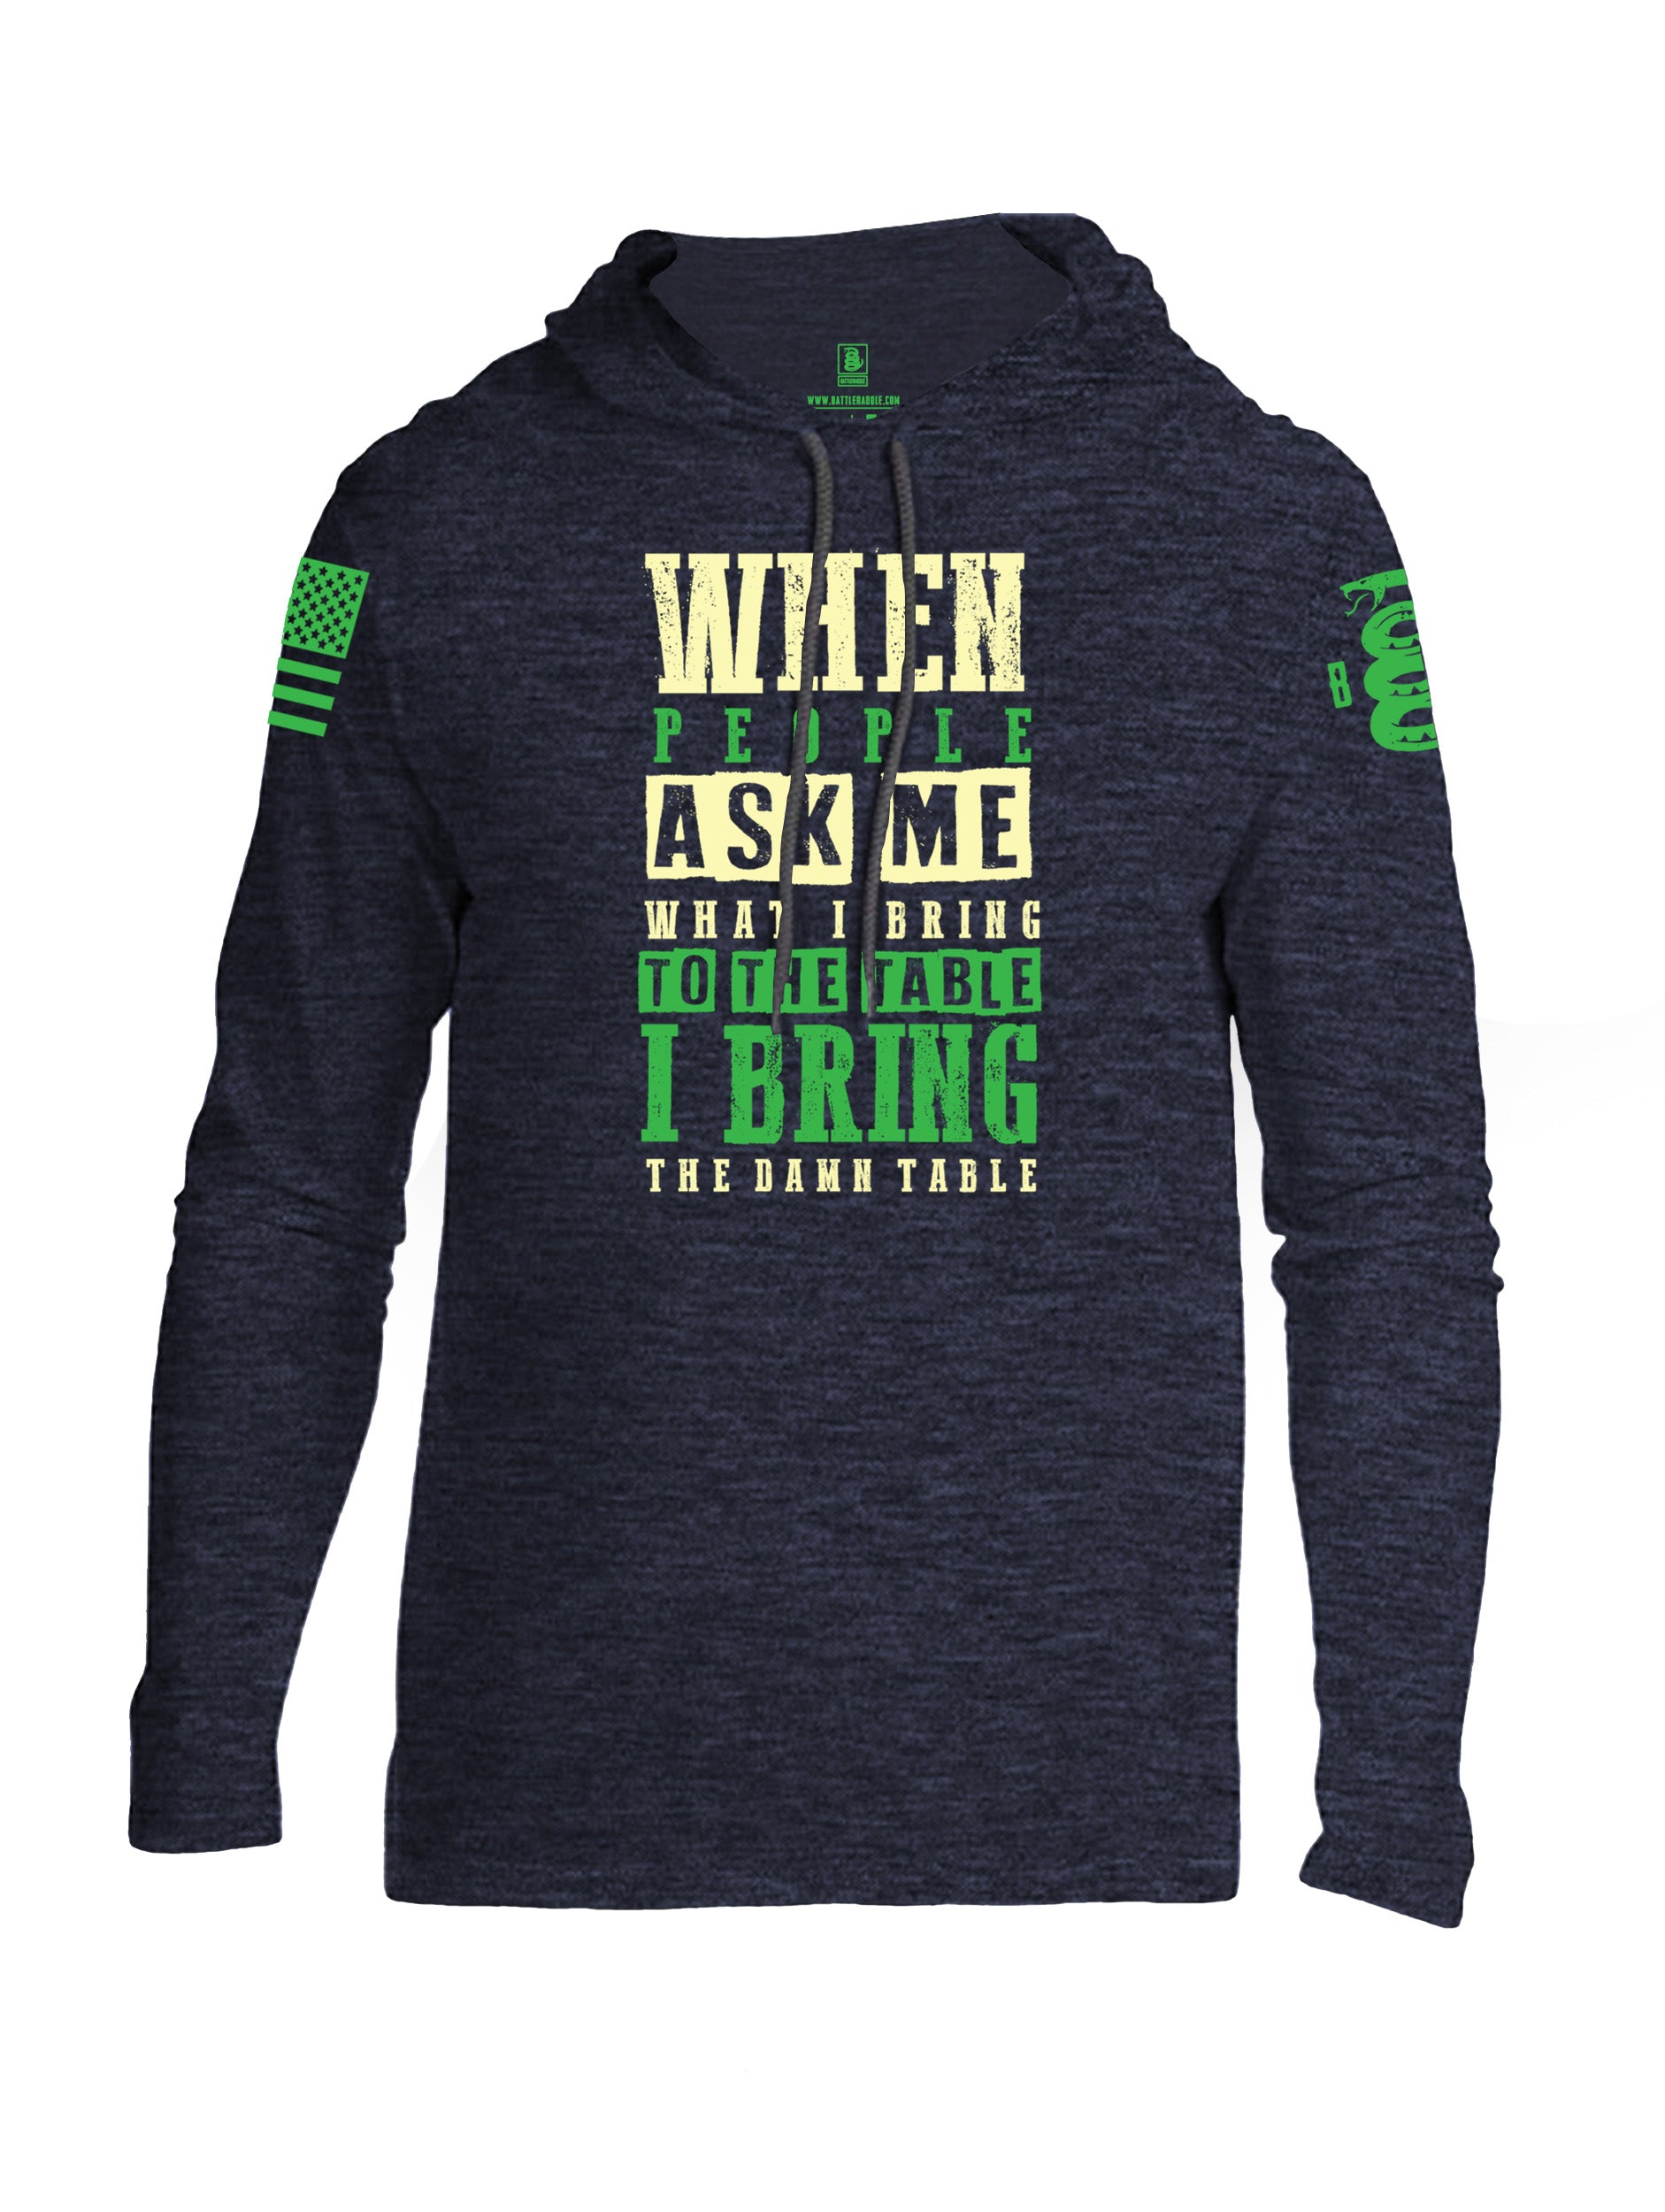 Battleraddle When People Ask Me What I Bring To The Table I Bring The Damn Table Green Sleeve Print Mens Thin Cotton Lightweight Hoodie